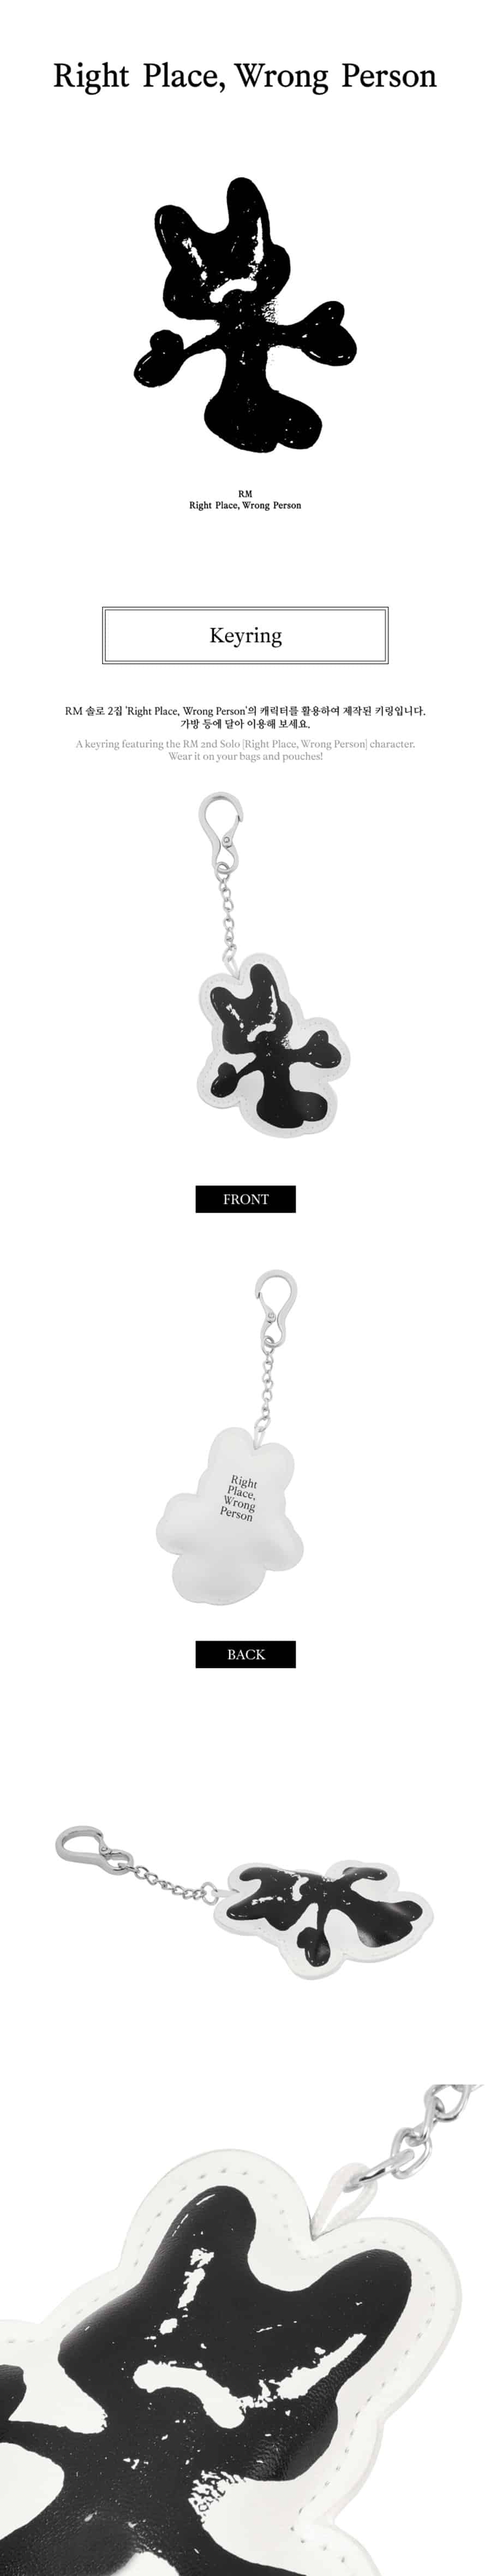 rm-right-place-wrong-person-keyring-wholesales